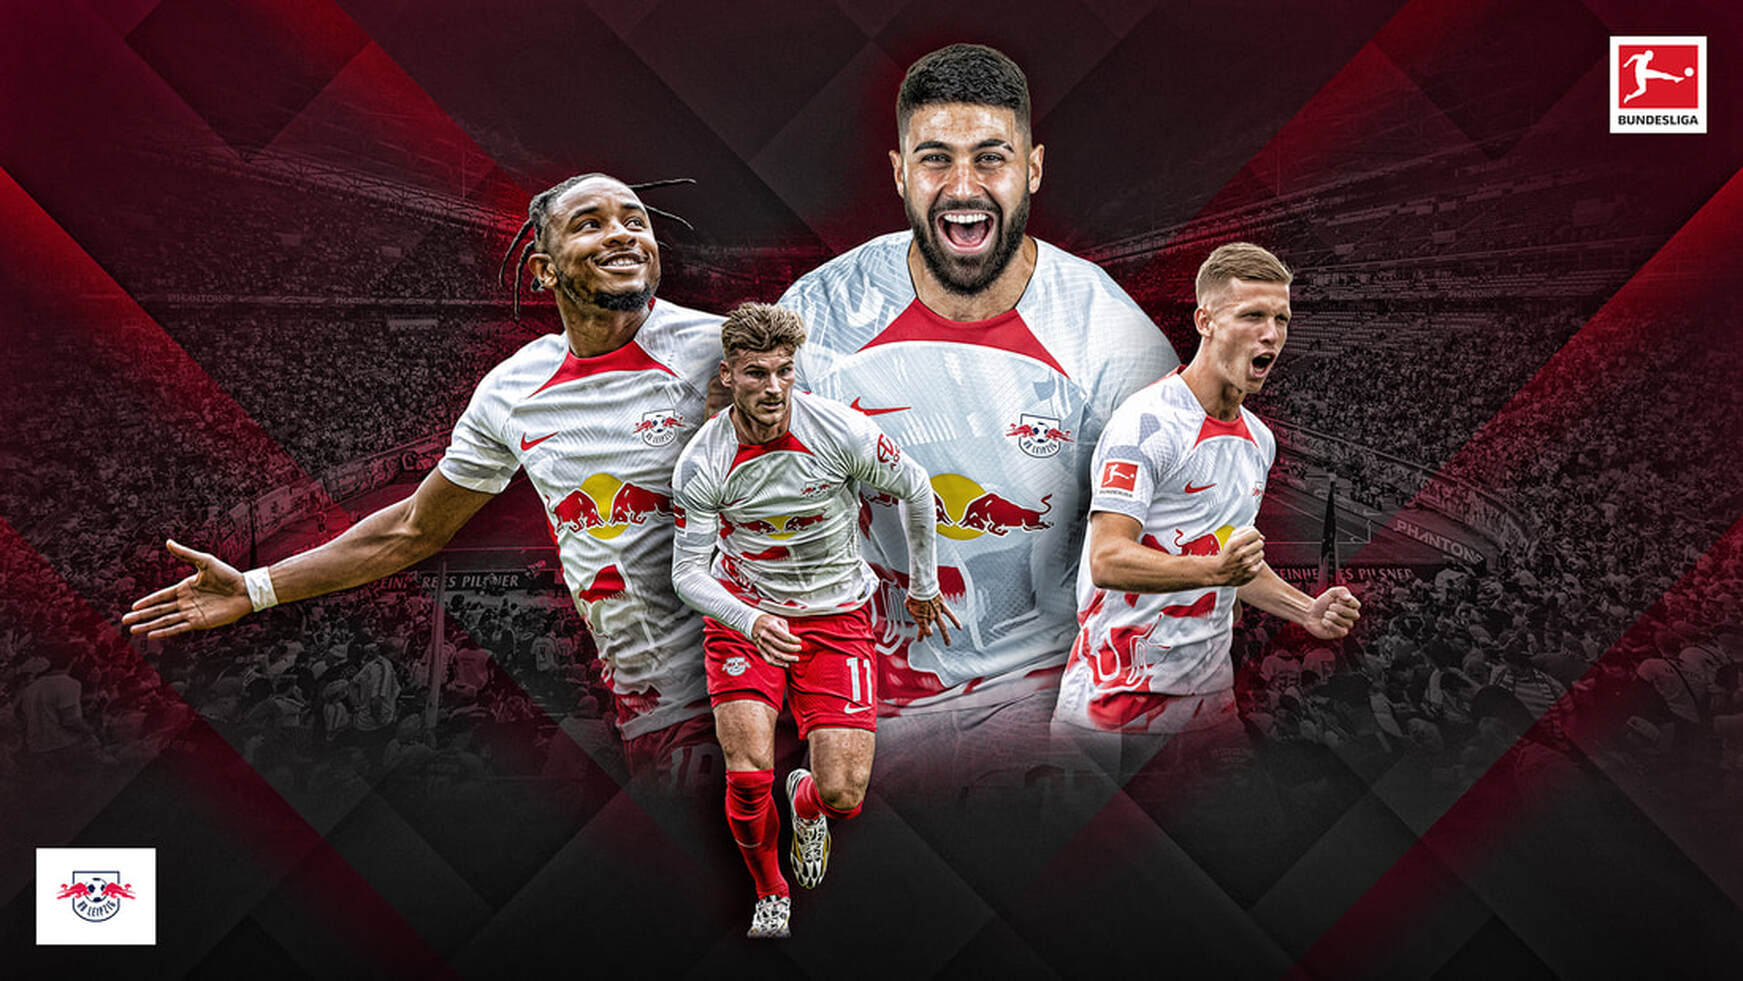 photoshop montage of rb leipzig players from the bundesliga